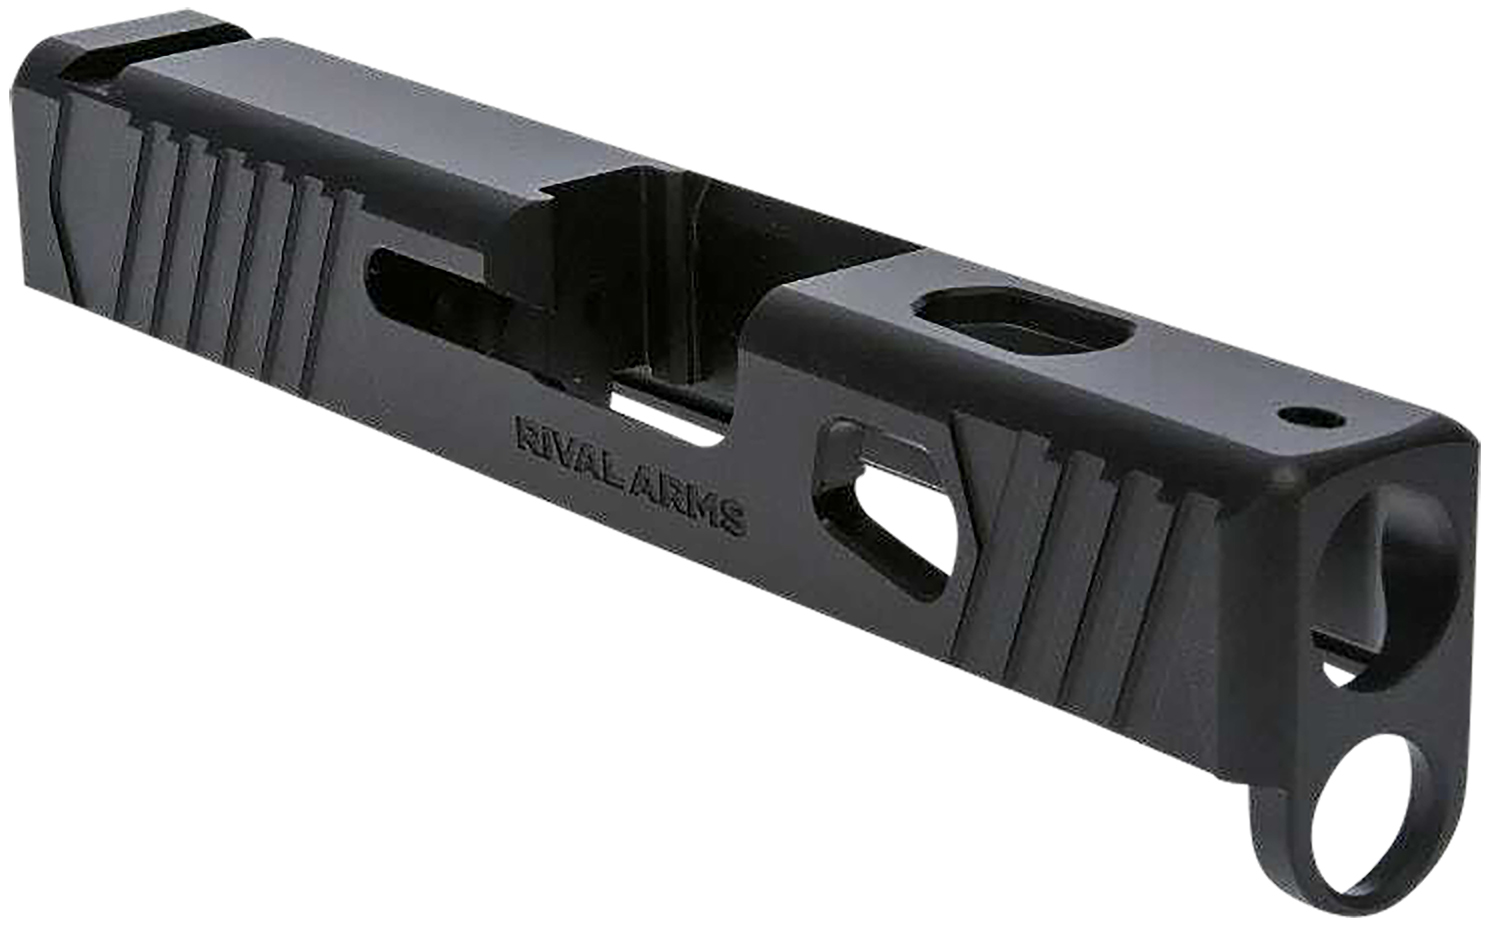 Rival Arms RA10G305A Precision Slide A1 QPQ Black 17-4 Stainless Steel with Front & Rear Serrations for Glock 43 Gen3